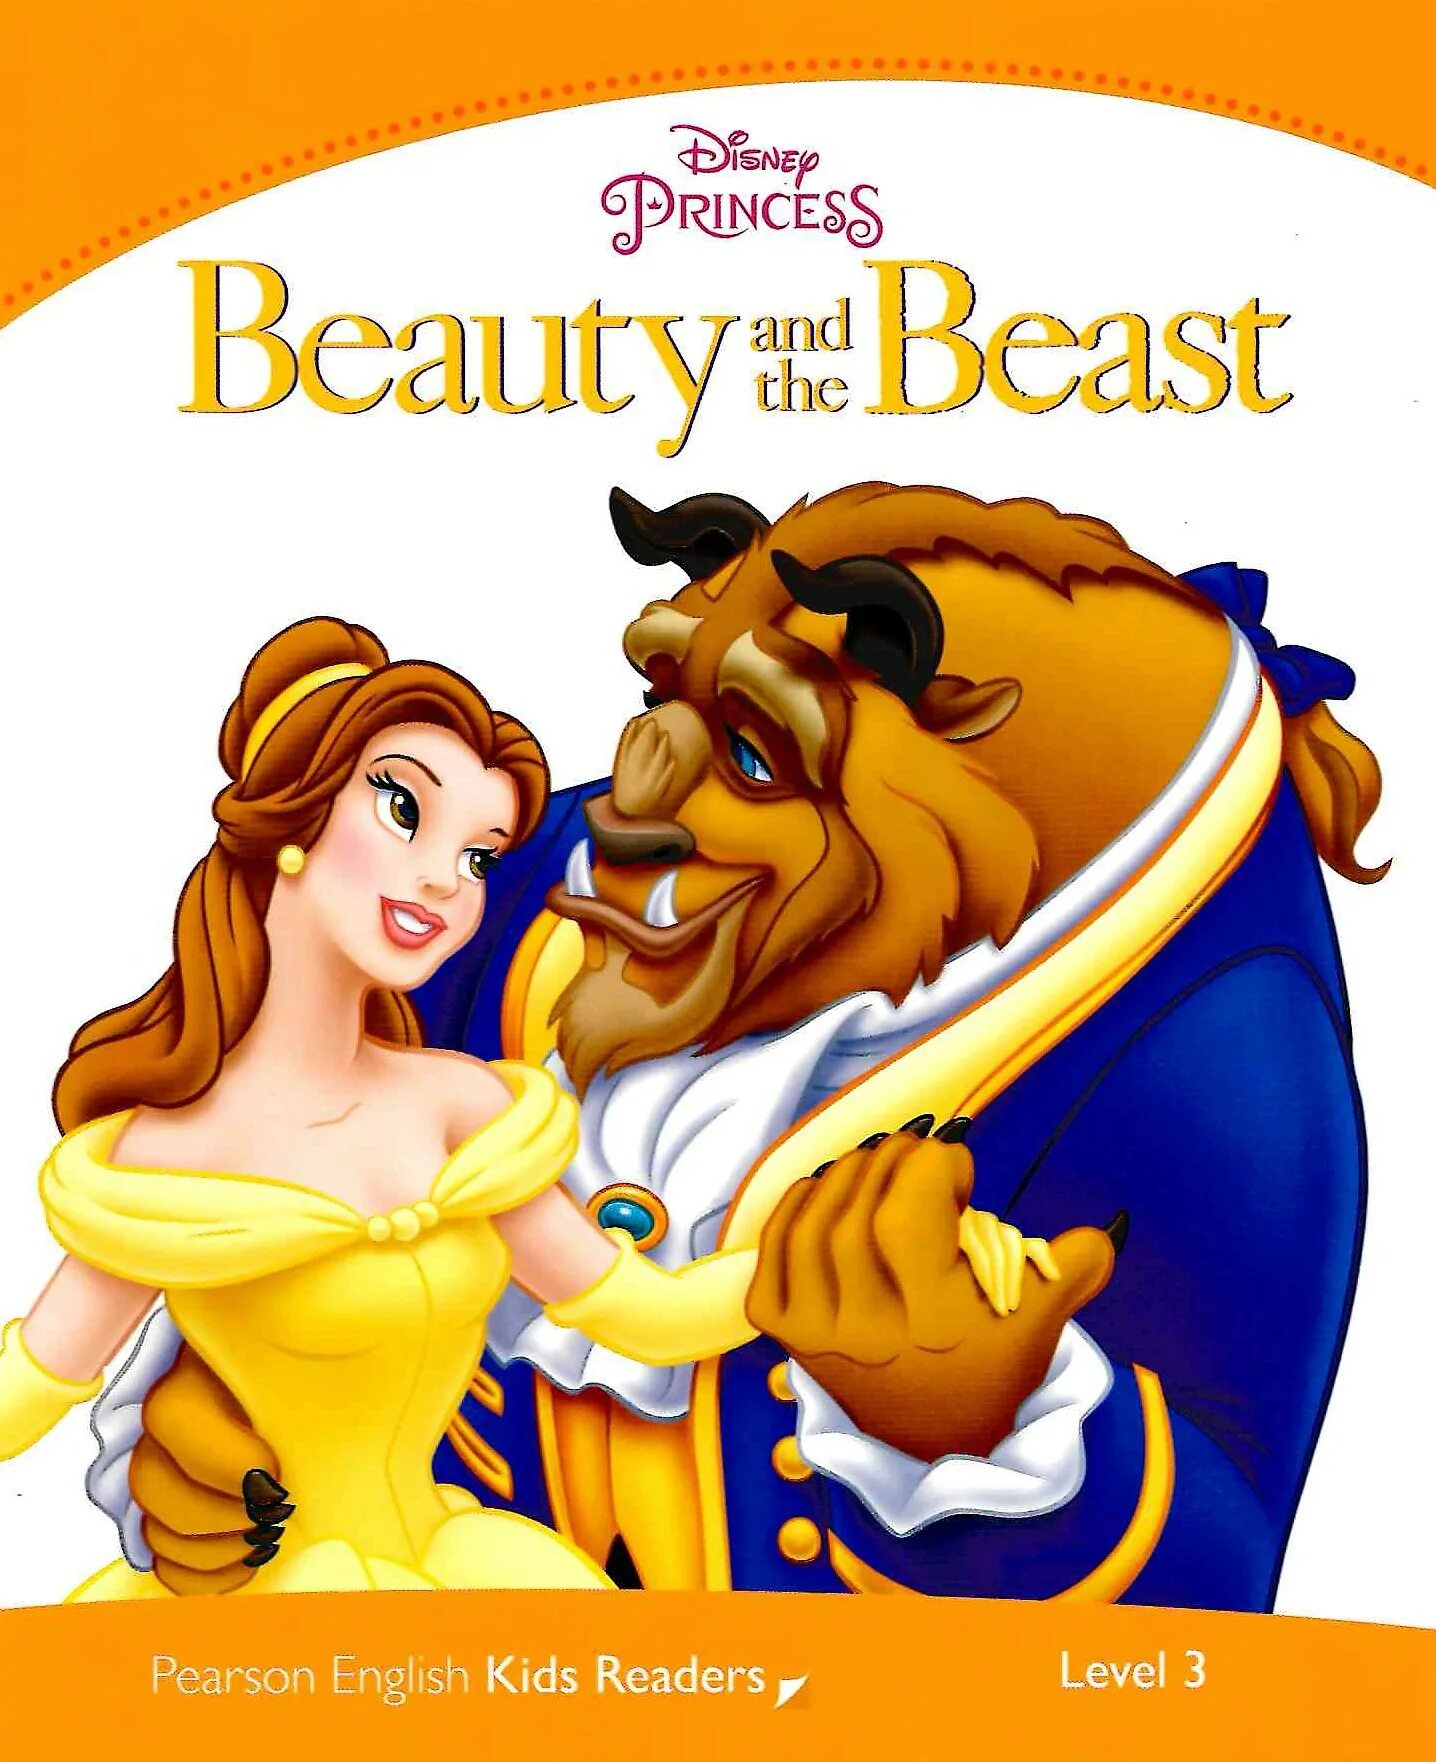 Beast level. Beauty and the Beast book. Beauty and the Beast книга. Beauty and the Beast Disney book.